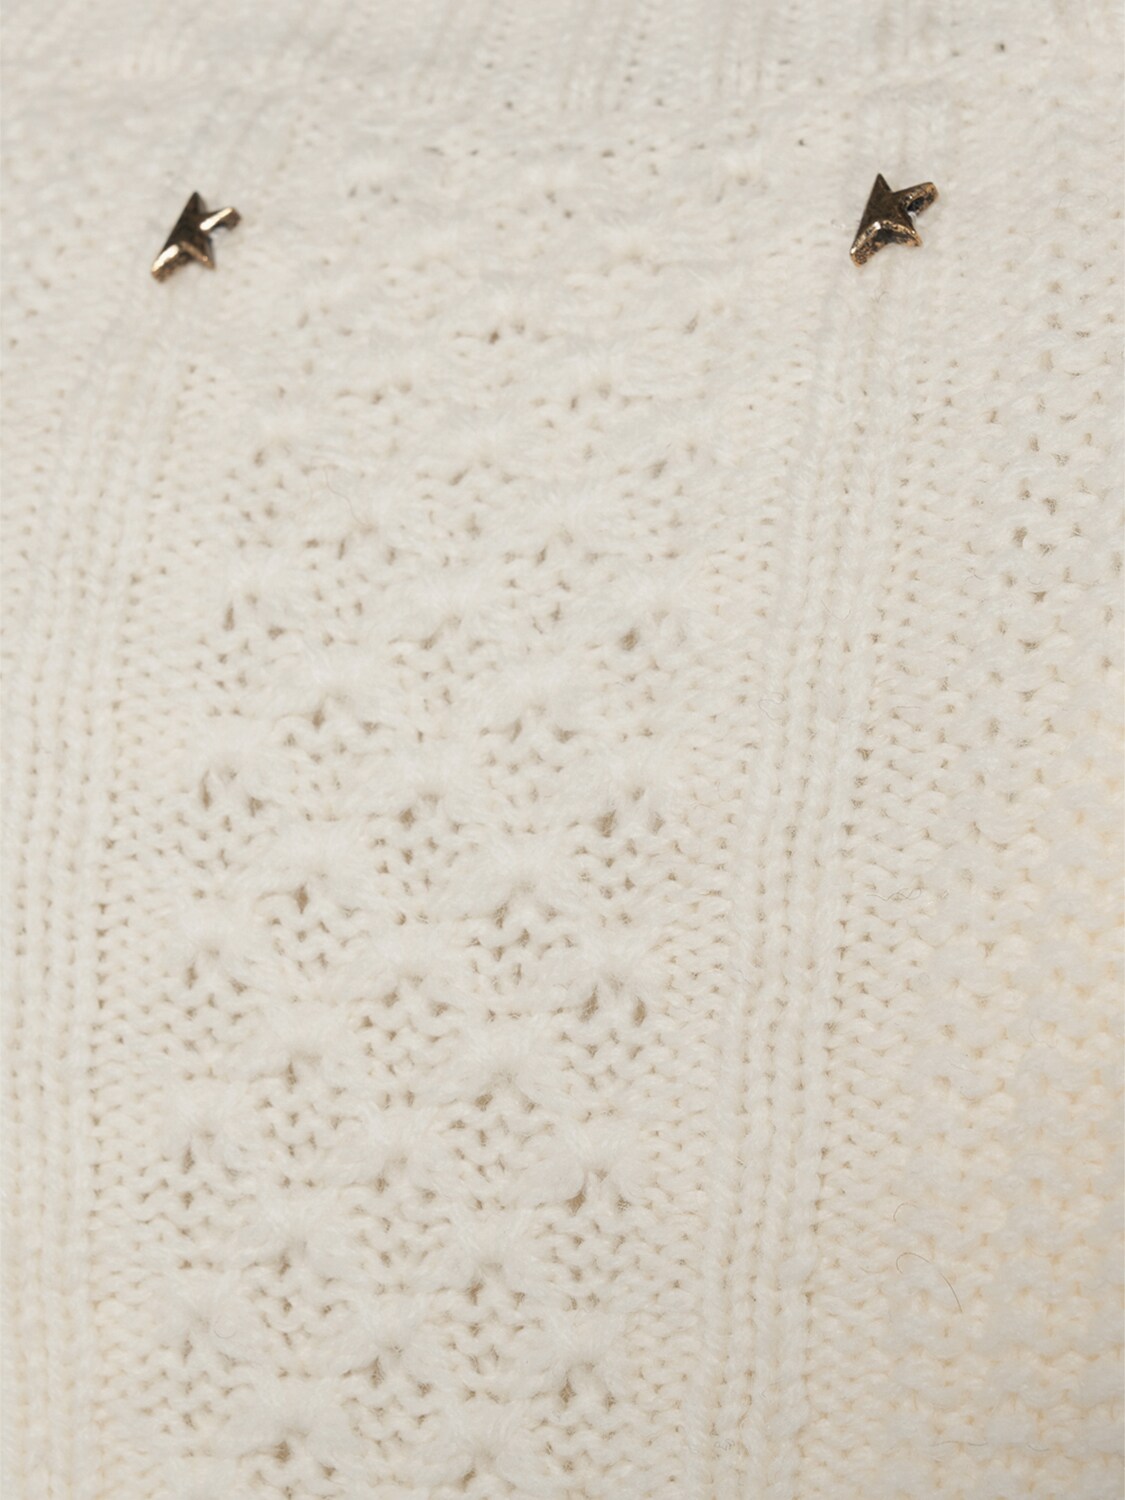 Shop Golden Goose Journey Wool Sweater In White